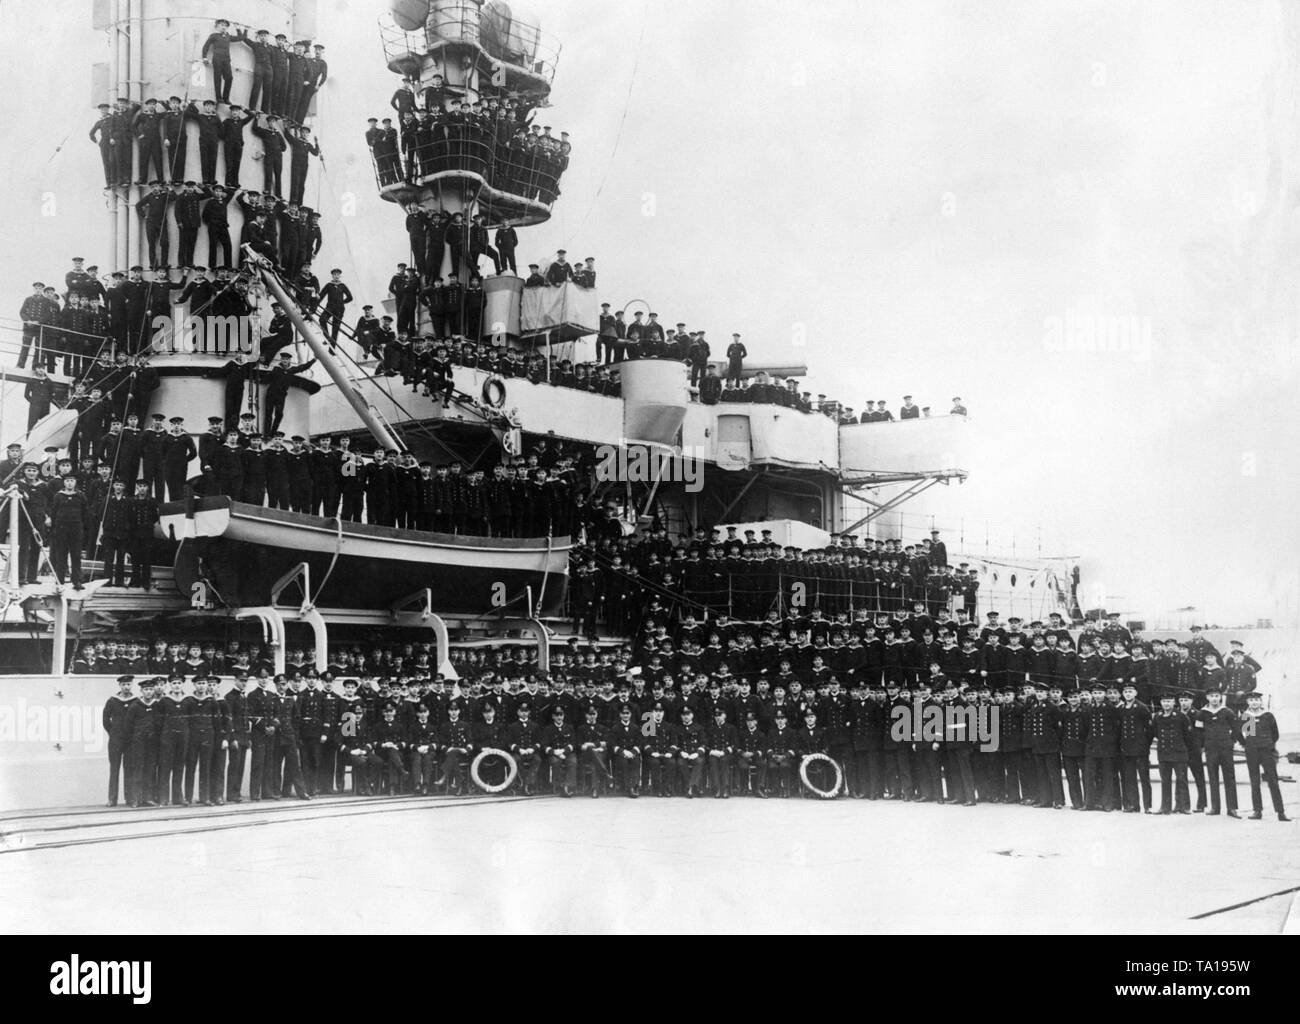 The picture shows the crew on and in front of the light cruiser 'Emden', a training ship of the Reichsmarine. The picture arose before the departure for the 2nd world tour, which lasted from 5.12.1928 to 3.12.1929. For this trip, the 'Emden' had 66 officers on board as part of the crew. Stock Photo